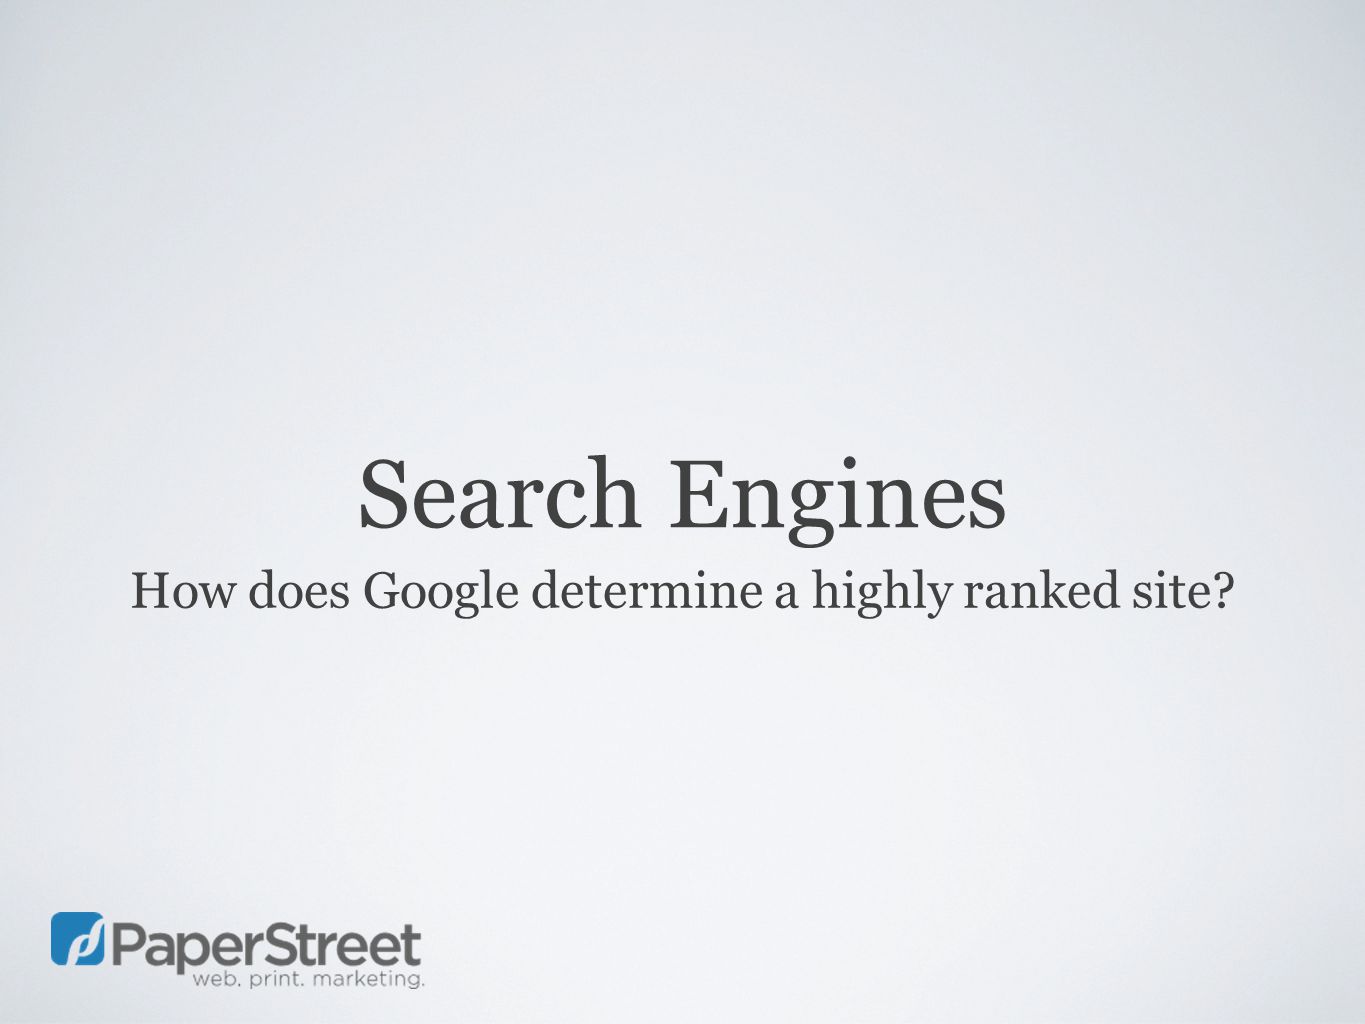 Search Engines How does Google determine a highly ranked site